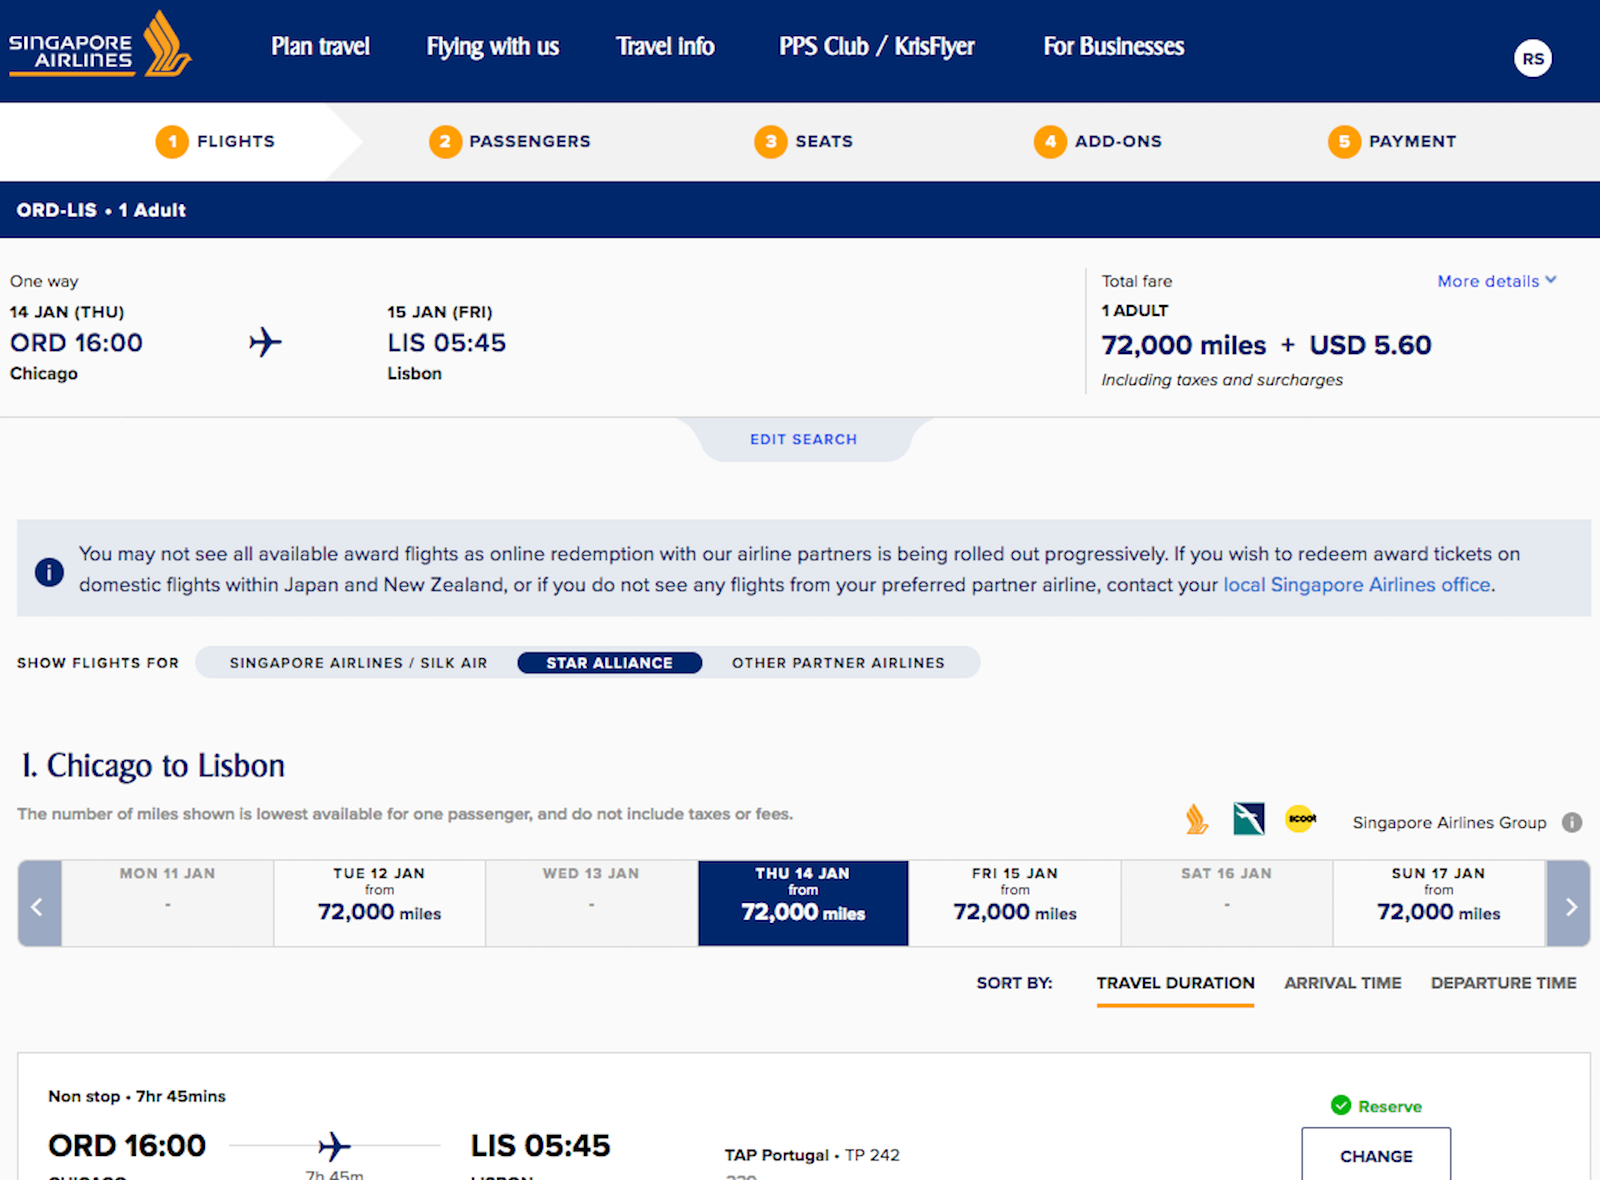 Singapore Airlines KrisFlyer redemptions are easier now